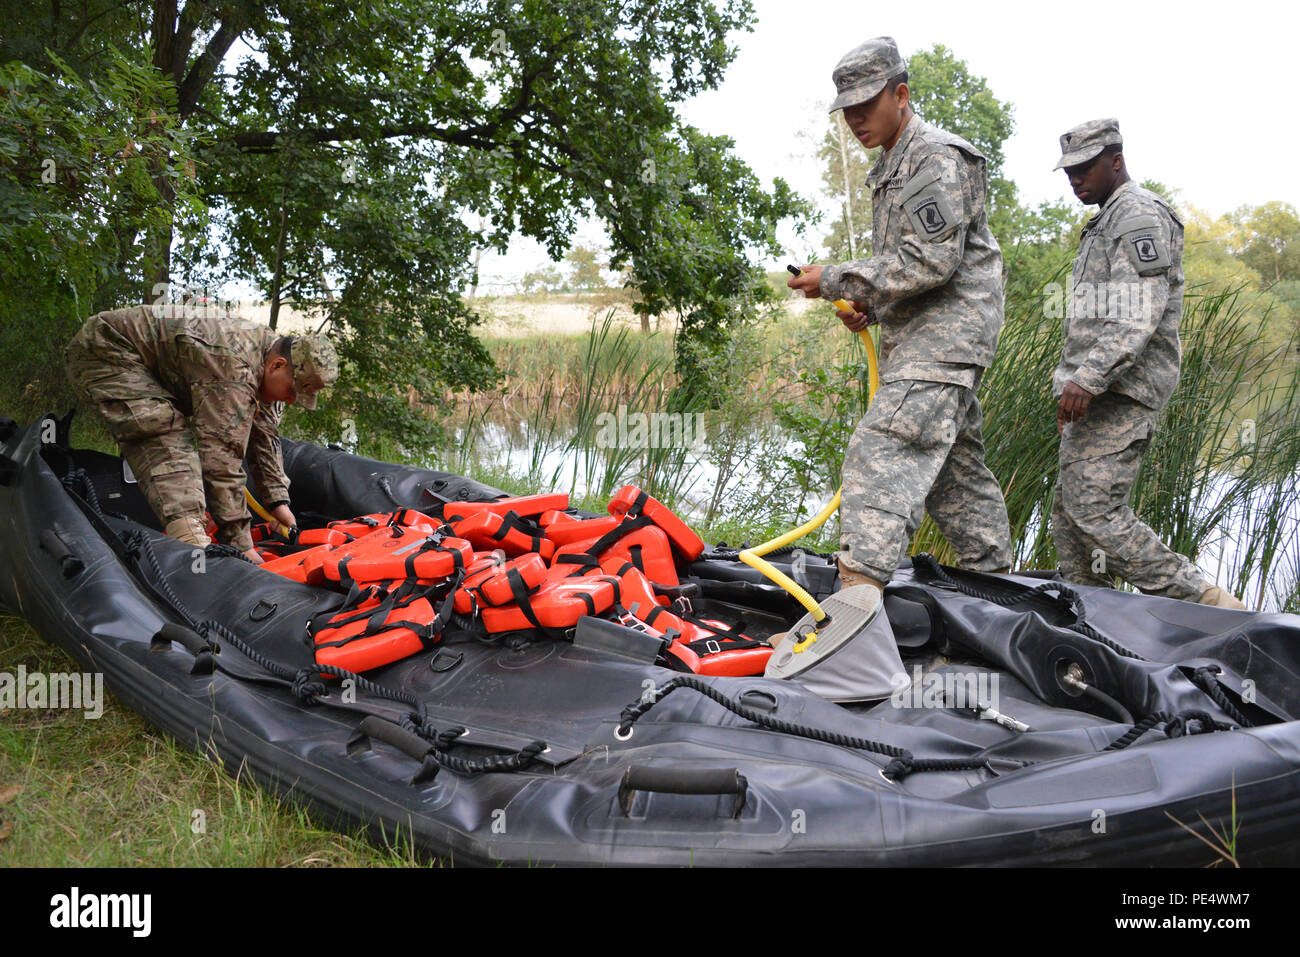 U.S. Army paratroopers, assigned to 1st Squadron, 91st Cavalry Regiment, 173rd Airborne Brigade, prepare a Zodiac inflatable boat as part of Exercise Sky Soldier II at Bechyne Training Area, Czech Republic, Sept. 22, 2015. Sky Soldier is a series of bilateral exercises between the 173rd Airborne Brigade and the Czech army’s 4th Rapid Reaction Brigades designed to increase interoperability and strengthen partnerships between NATO airborne forces. (U.S. Army photo by Visual Information Specialist Gertrud Zach/released) Stock Photo